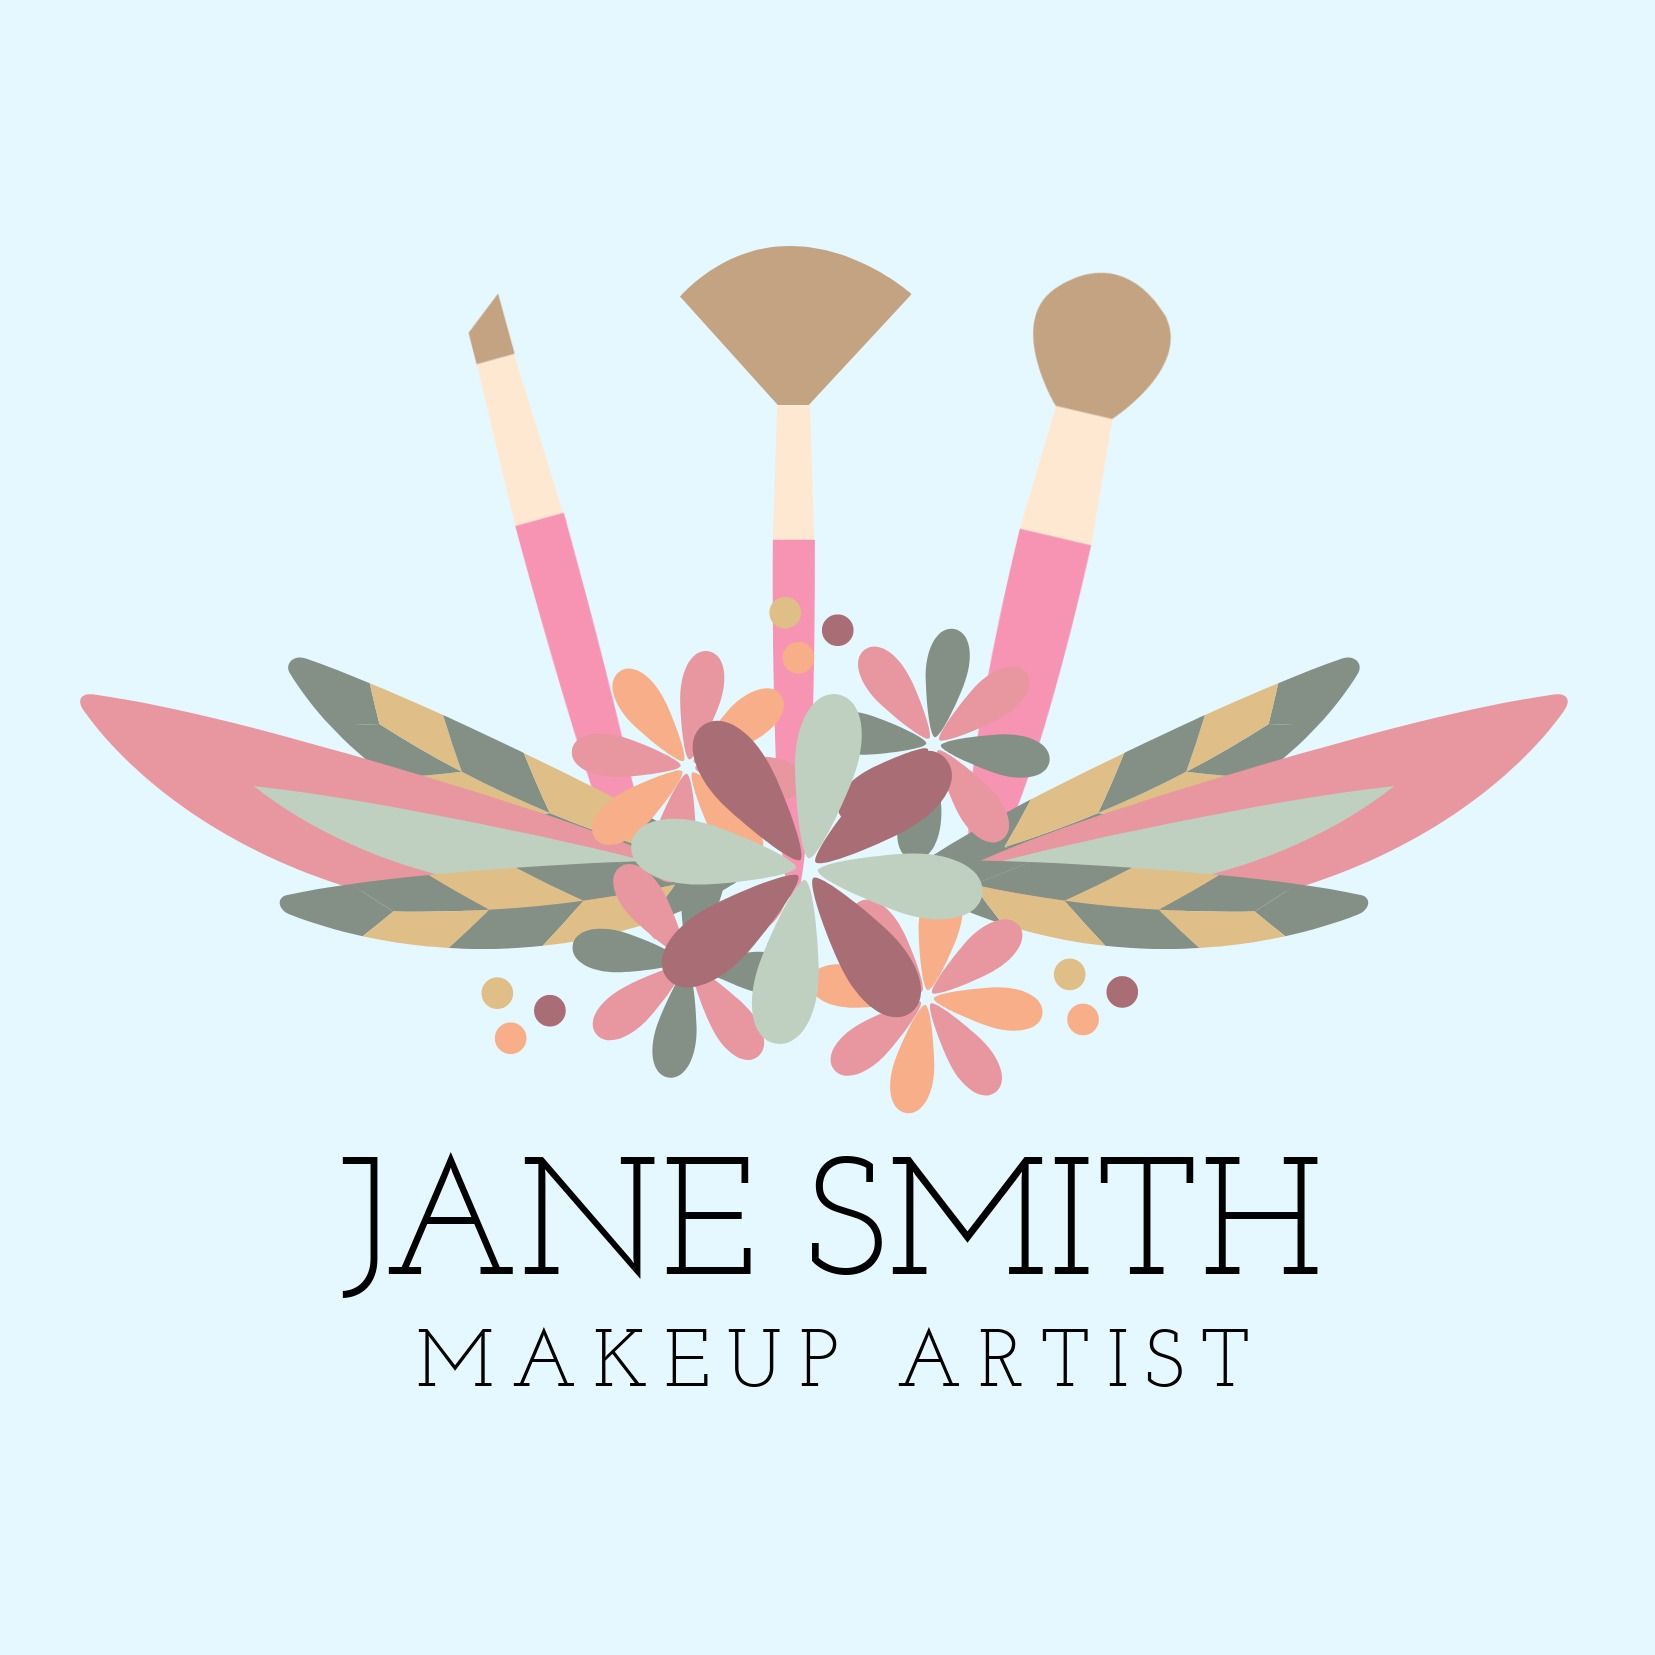 Pastel Jane Smith Makeup artist logo and accompanying text using slab serif - The complete guide to fonts: 5 essential types of fonts in typography - Image